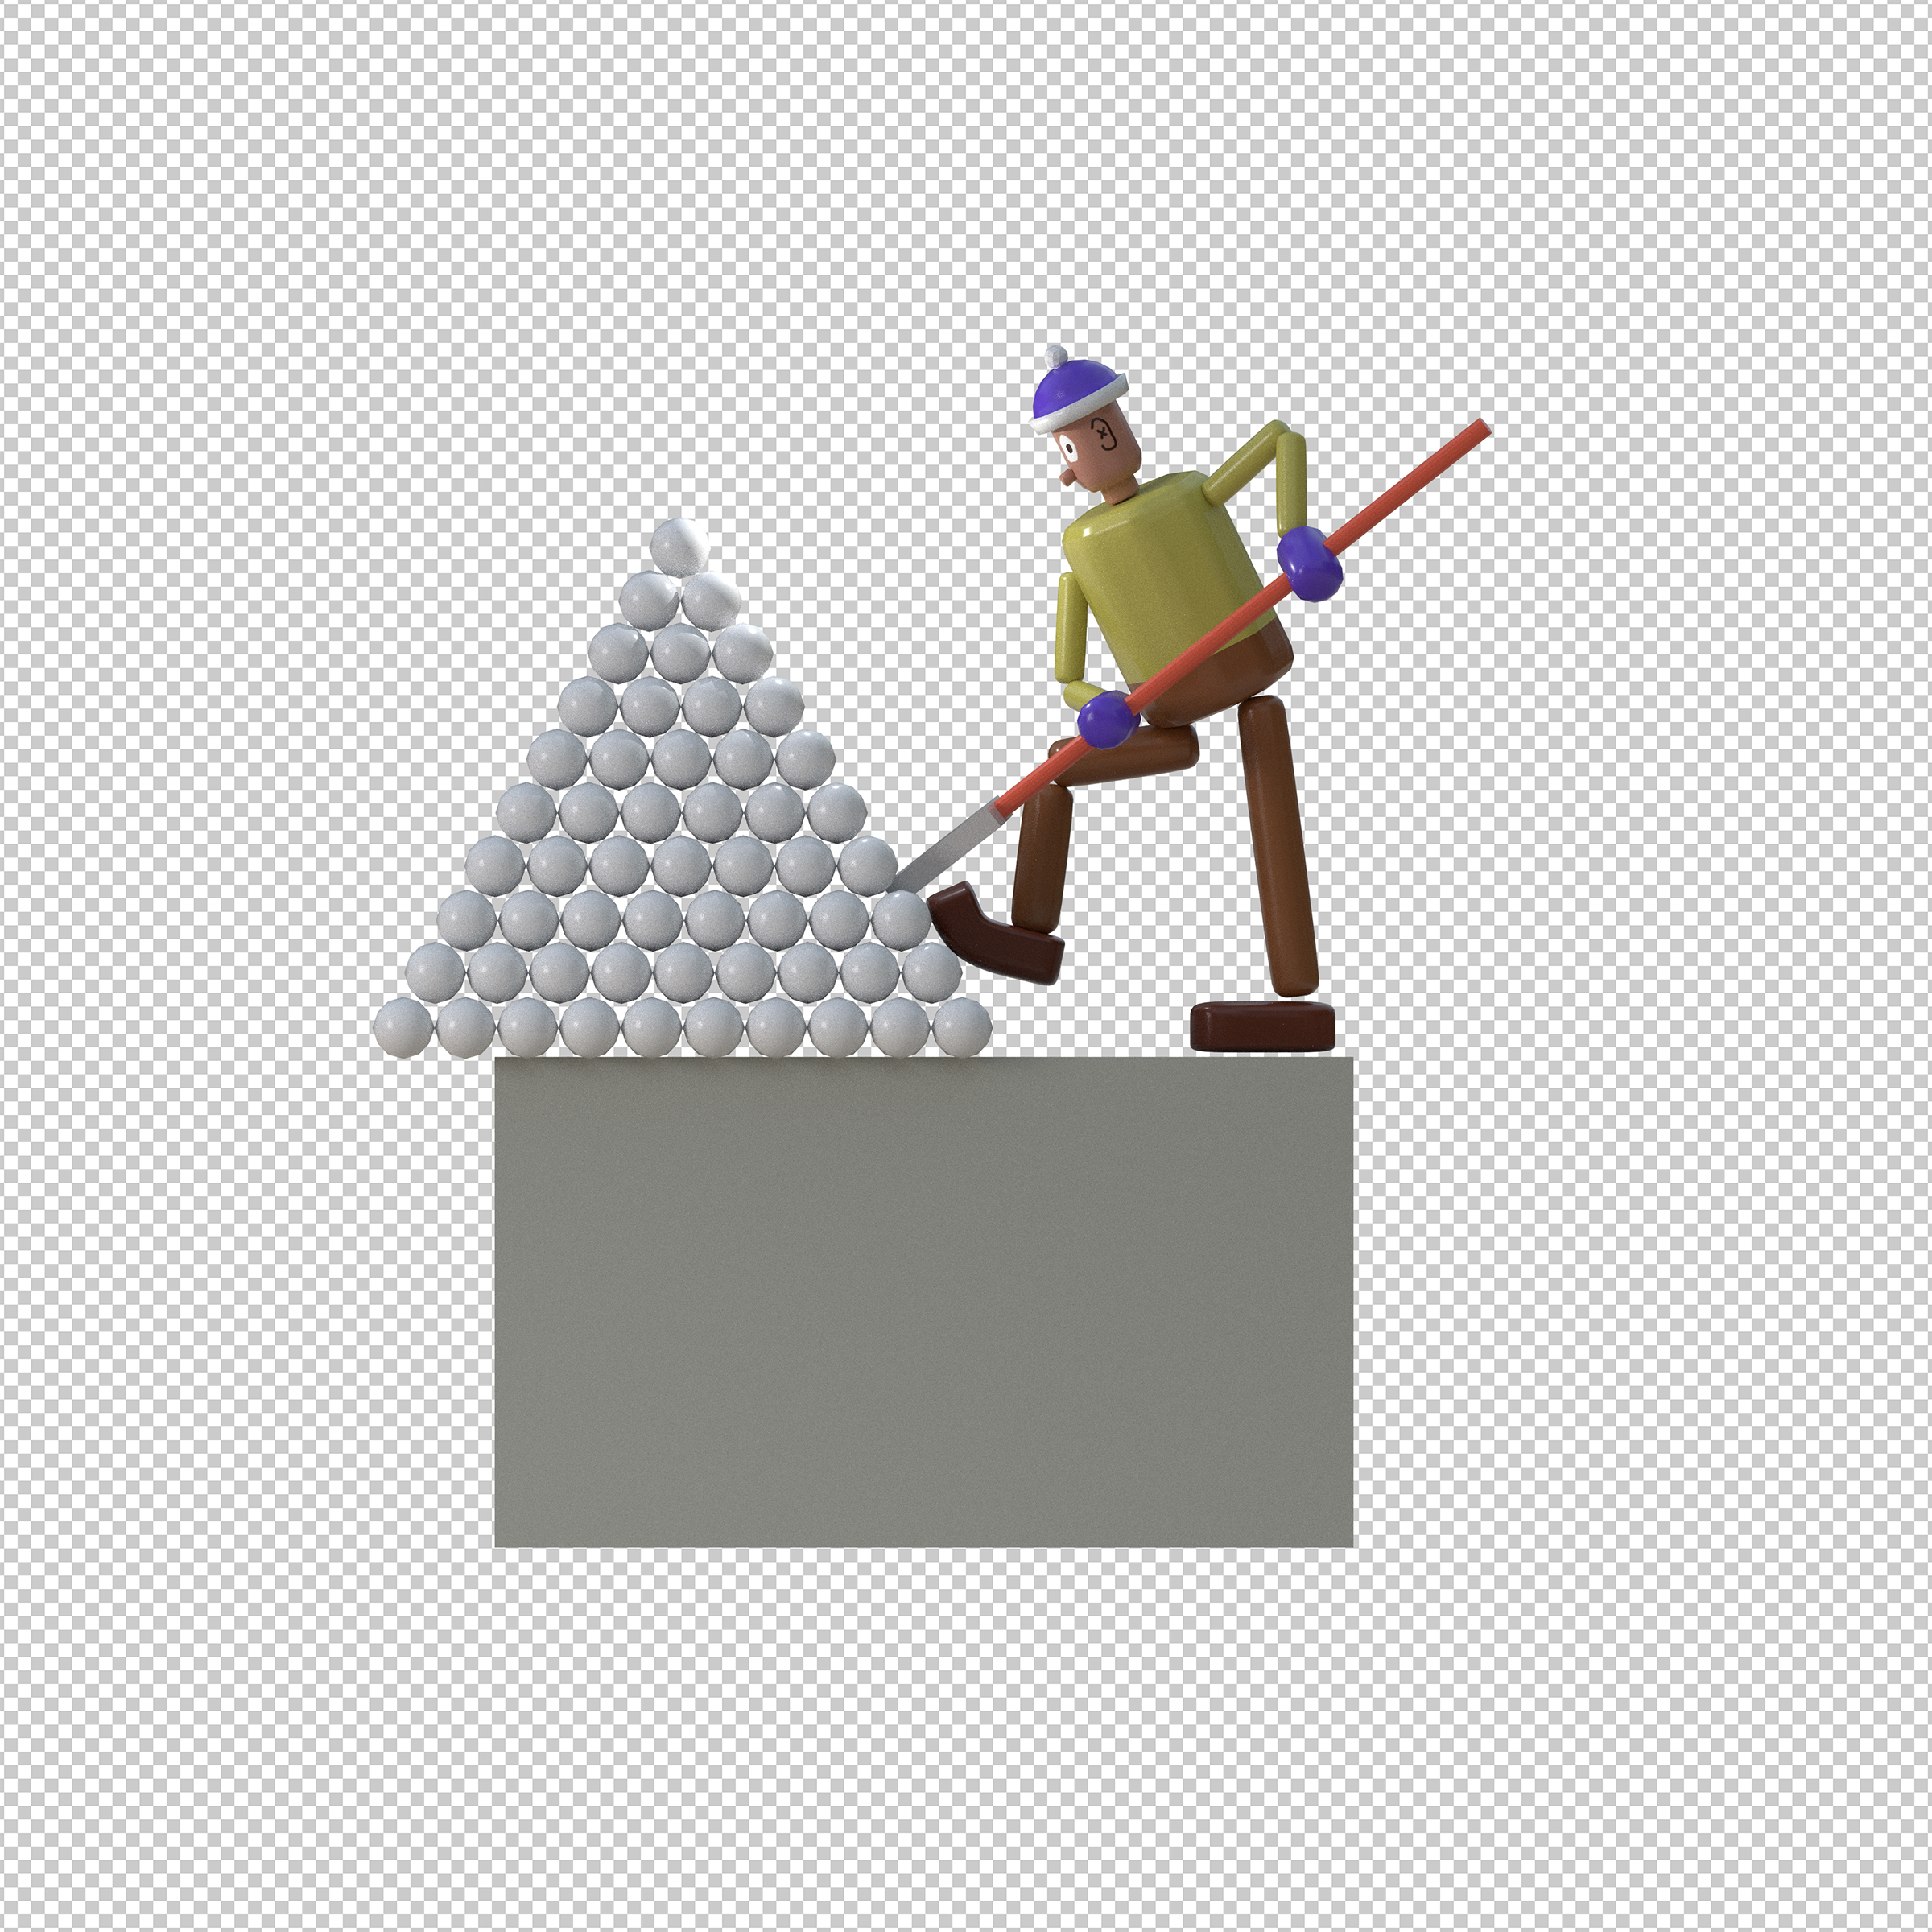 a 3D rendering of a push puppet toy shoveling snow